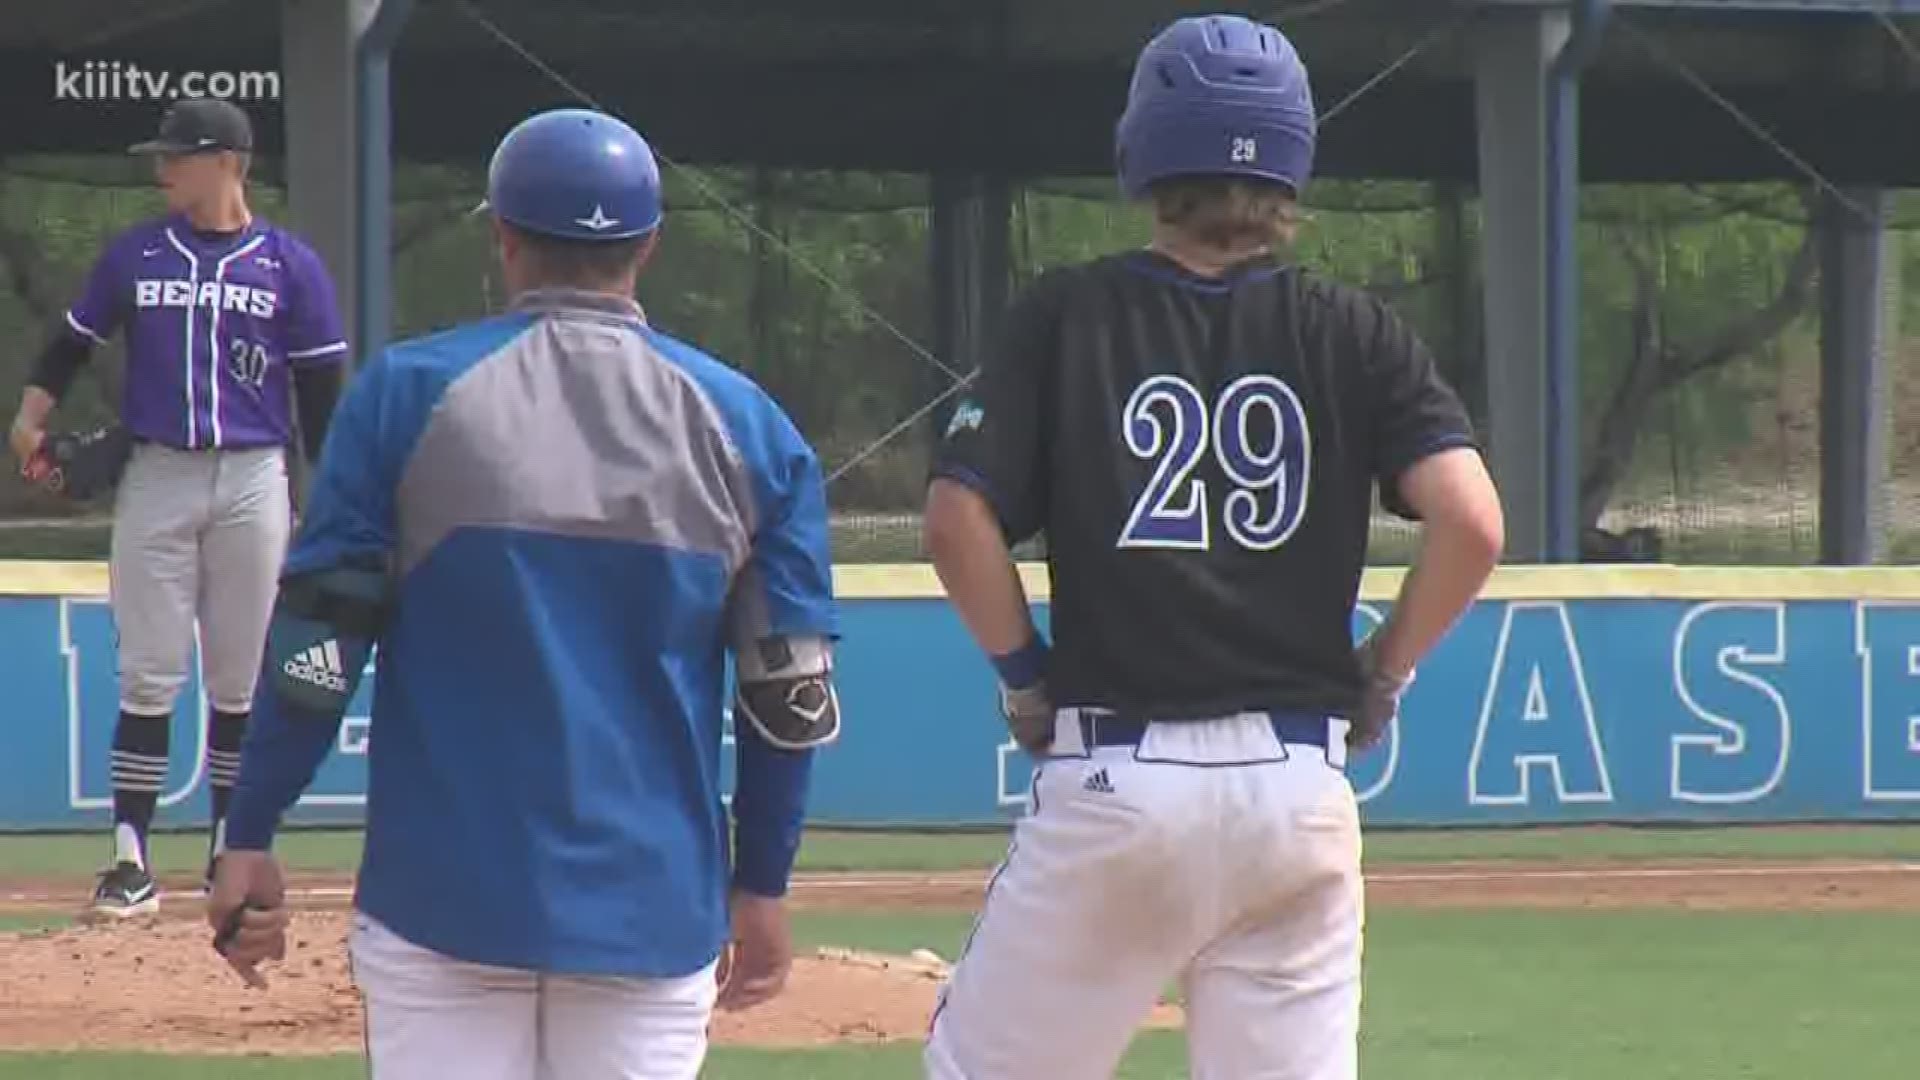 Texas A&M-Corpus Christi baseball completed a sweep of Central Arkansas on Saturday with a pair of wins.